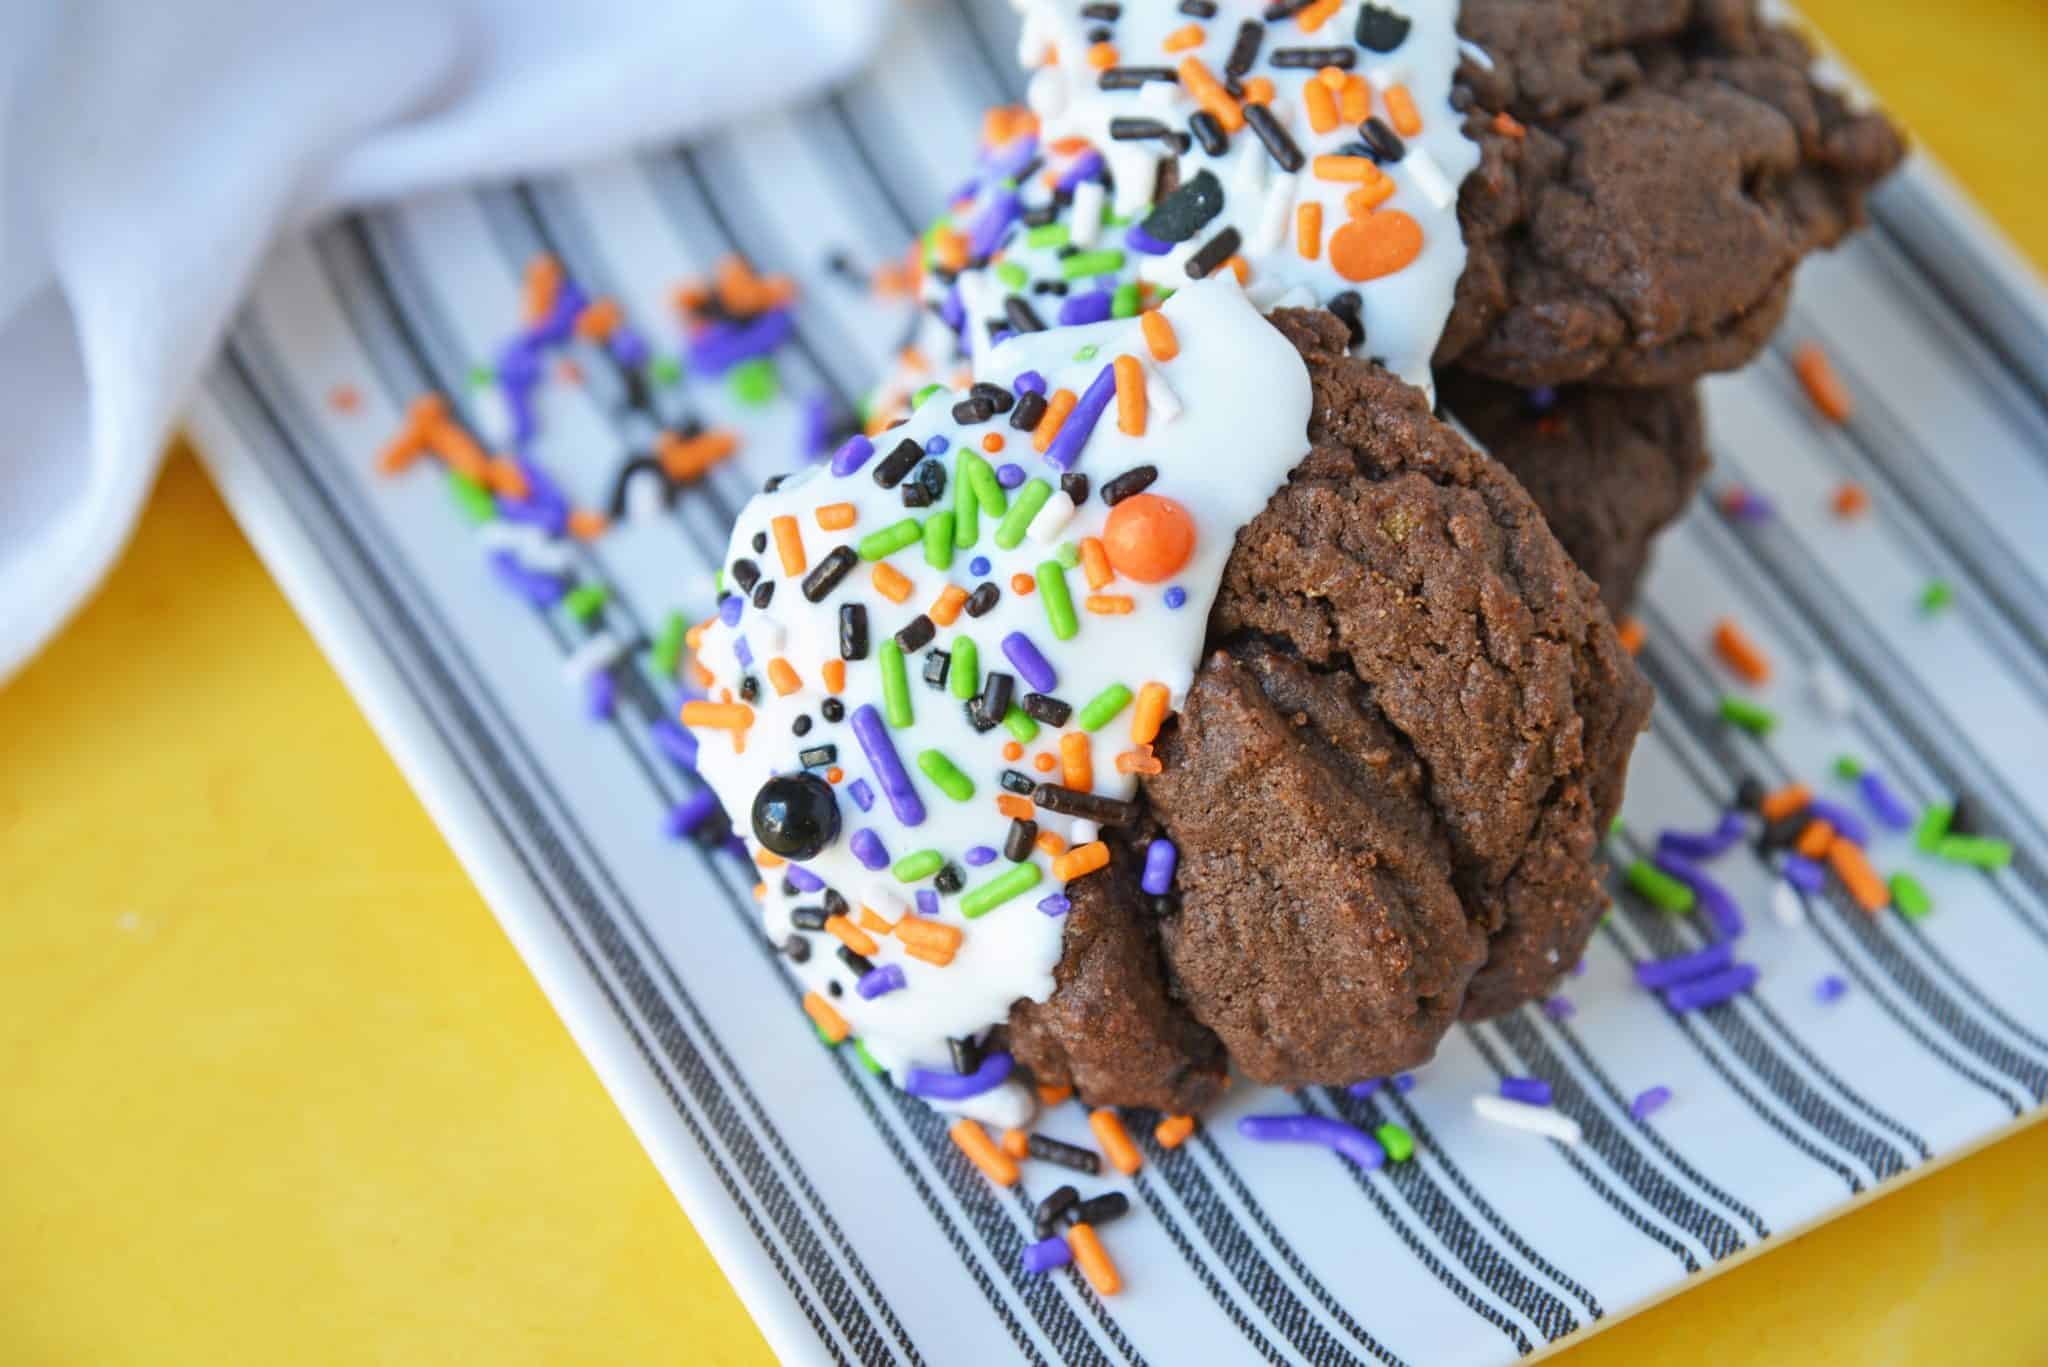 Halloween Chocolate Sugar Cookies combine soft sugar cookies with a delicious chocolate flavor, cookie icing and sprinkles for an easy Halloween dessert! #halloweencookies #chocolatesugarcookies #halloweendesserts www.savoryexperiments.com